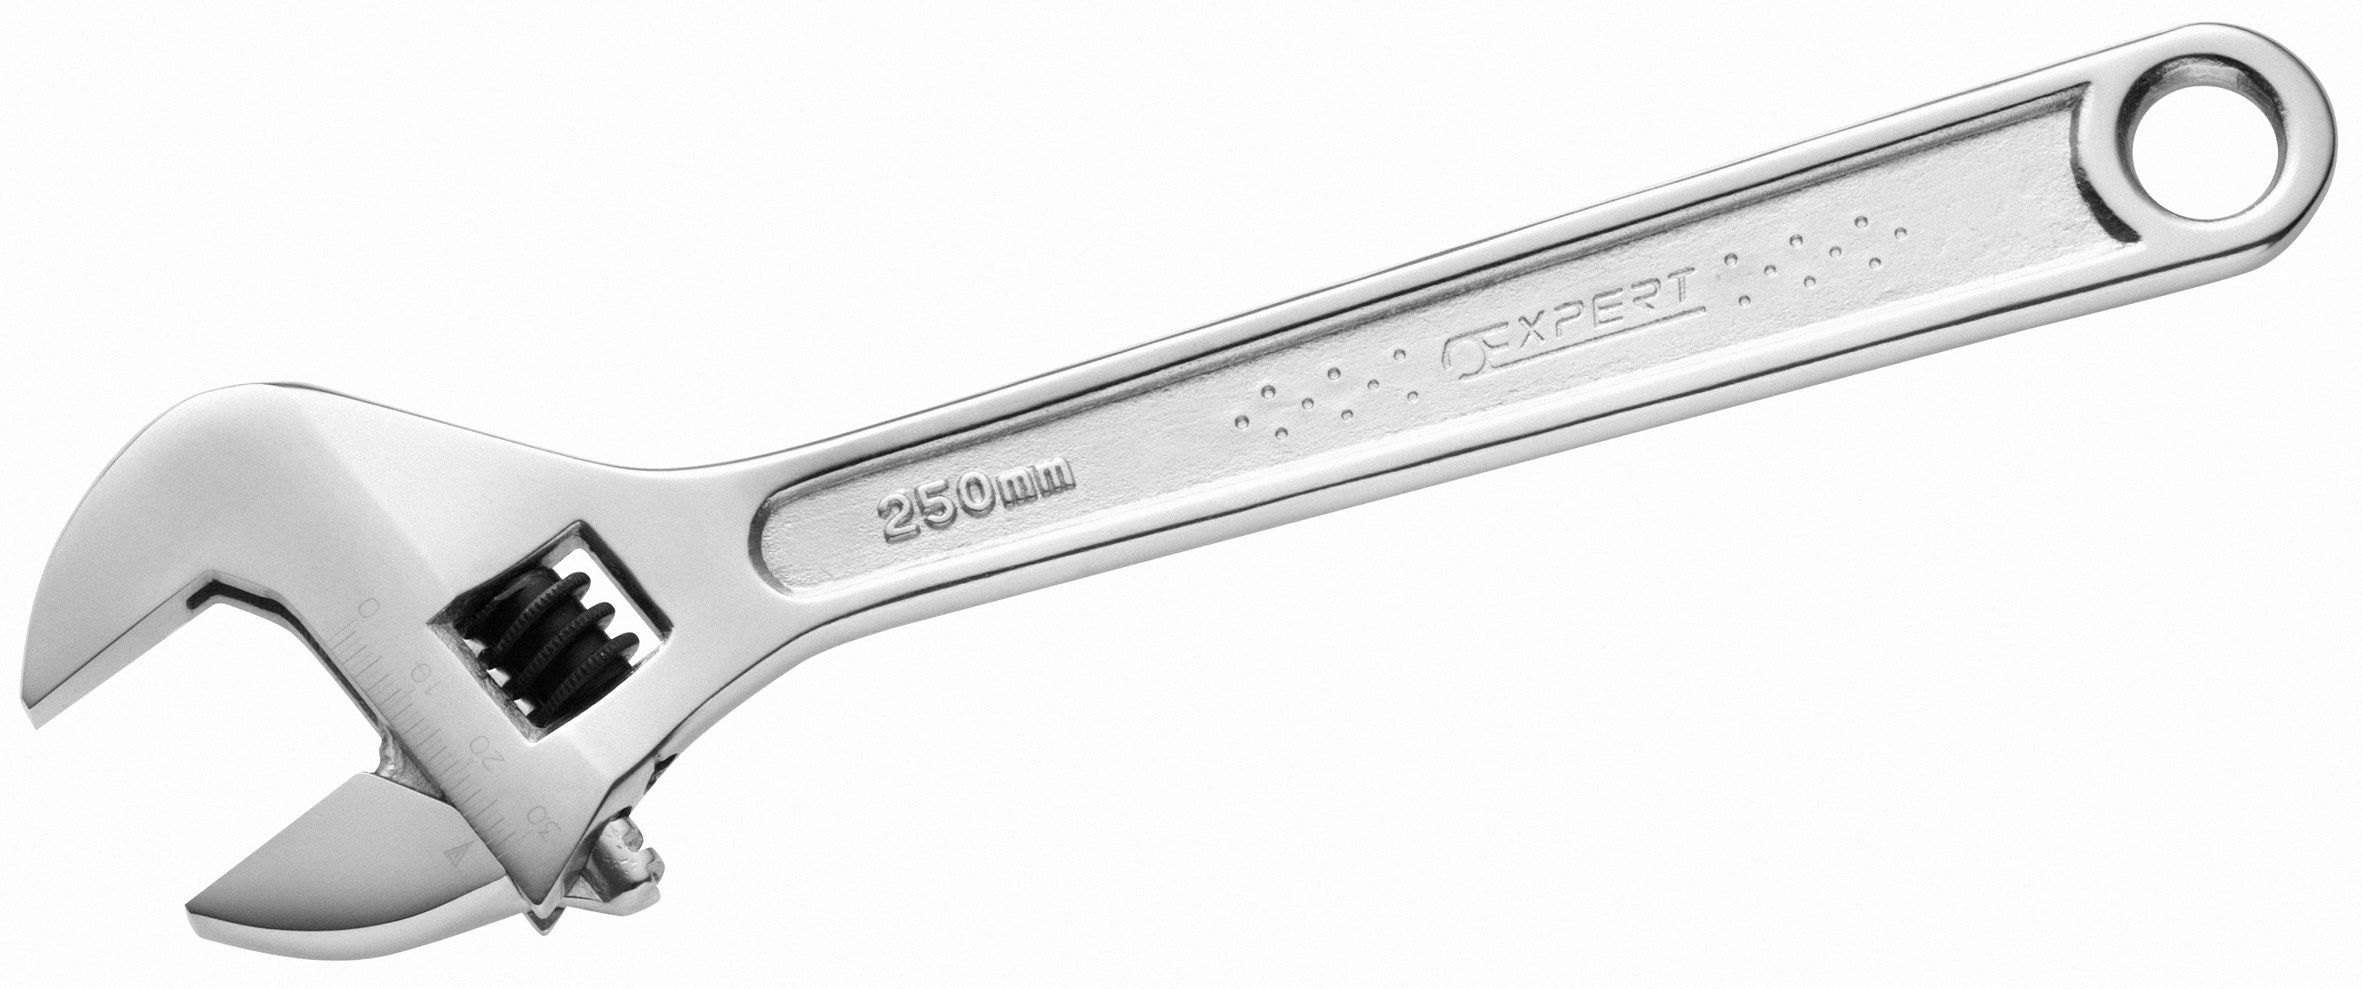 Britool Adjustable Wrench Chrome Plated 10 29mm Jaw Capacity